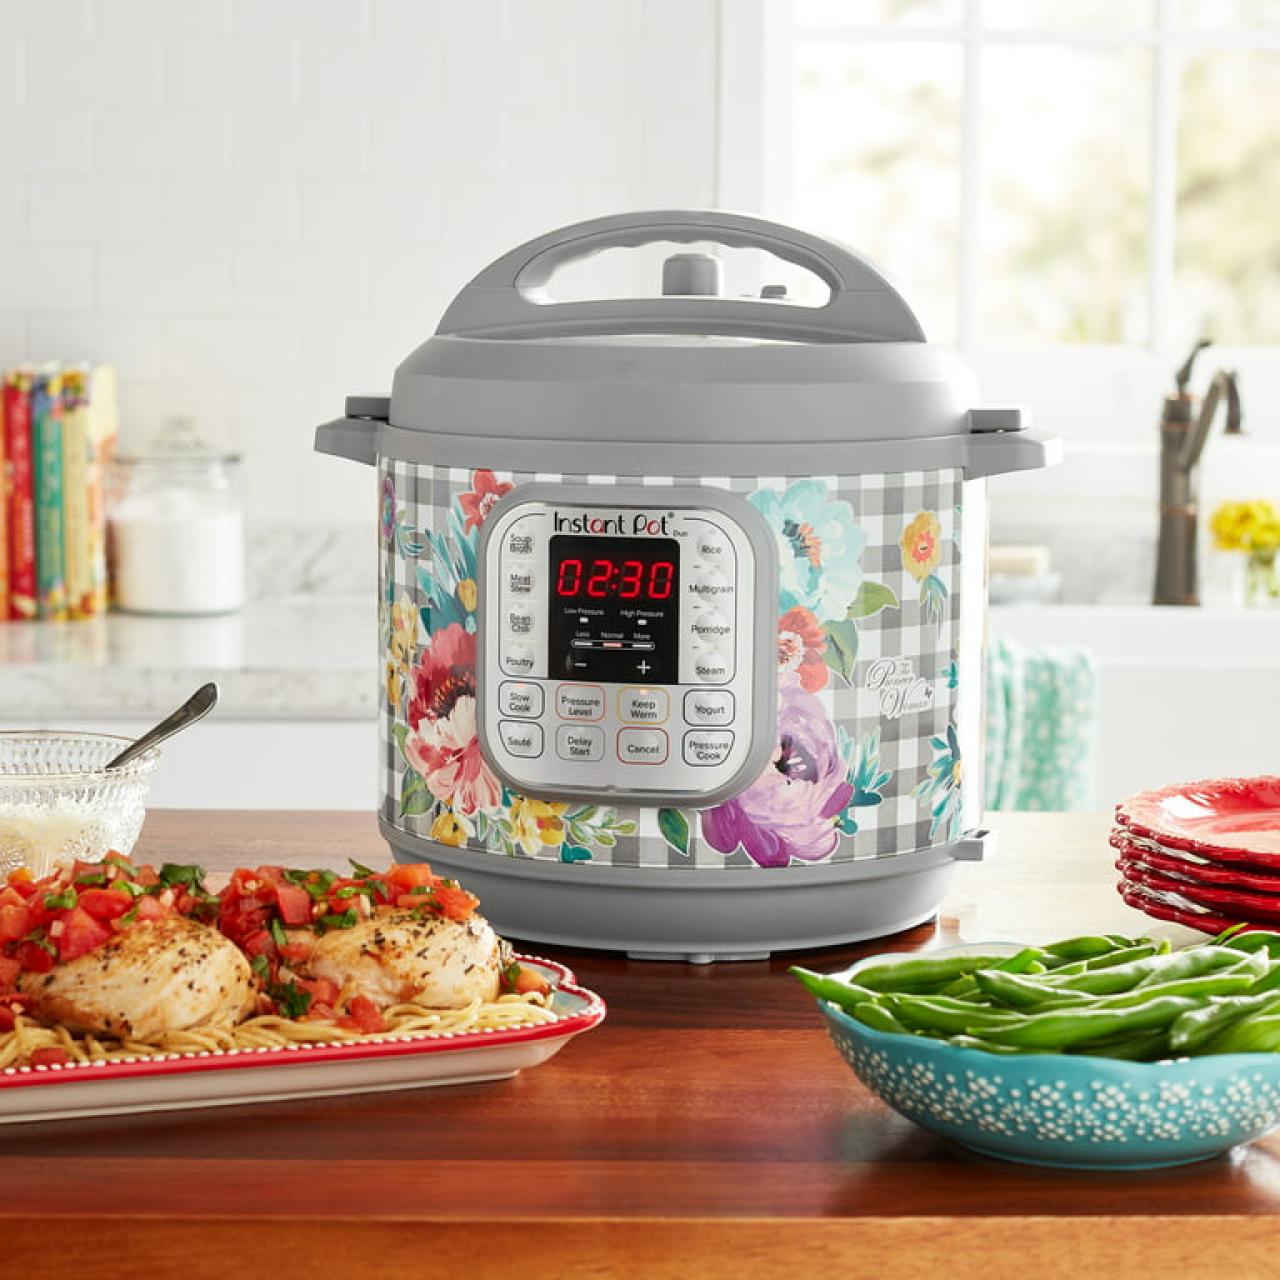 https://food.fnr.sndimg.com/content/dam/images/food/products/2023/7/19/rx_the-pioneer-woman-6-qt-instant-pot-duo-in-sweet-romance-.jpeg.rend.hgtvcom.1280.1280.suffix/1689778218391.jpeg